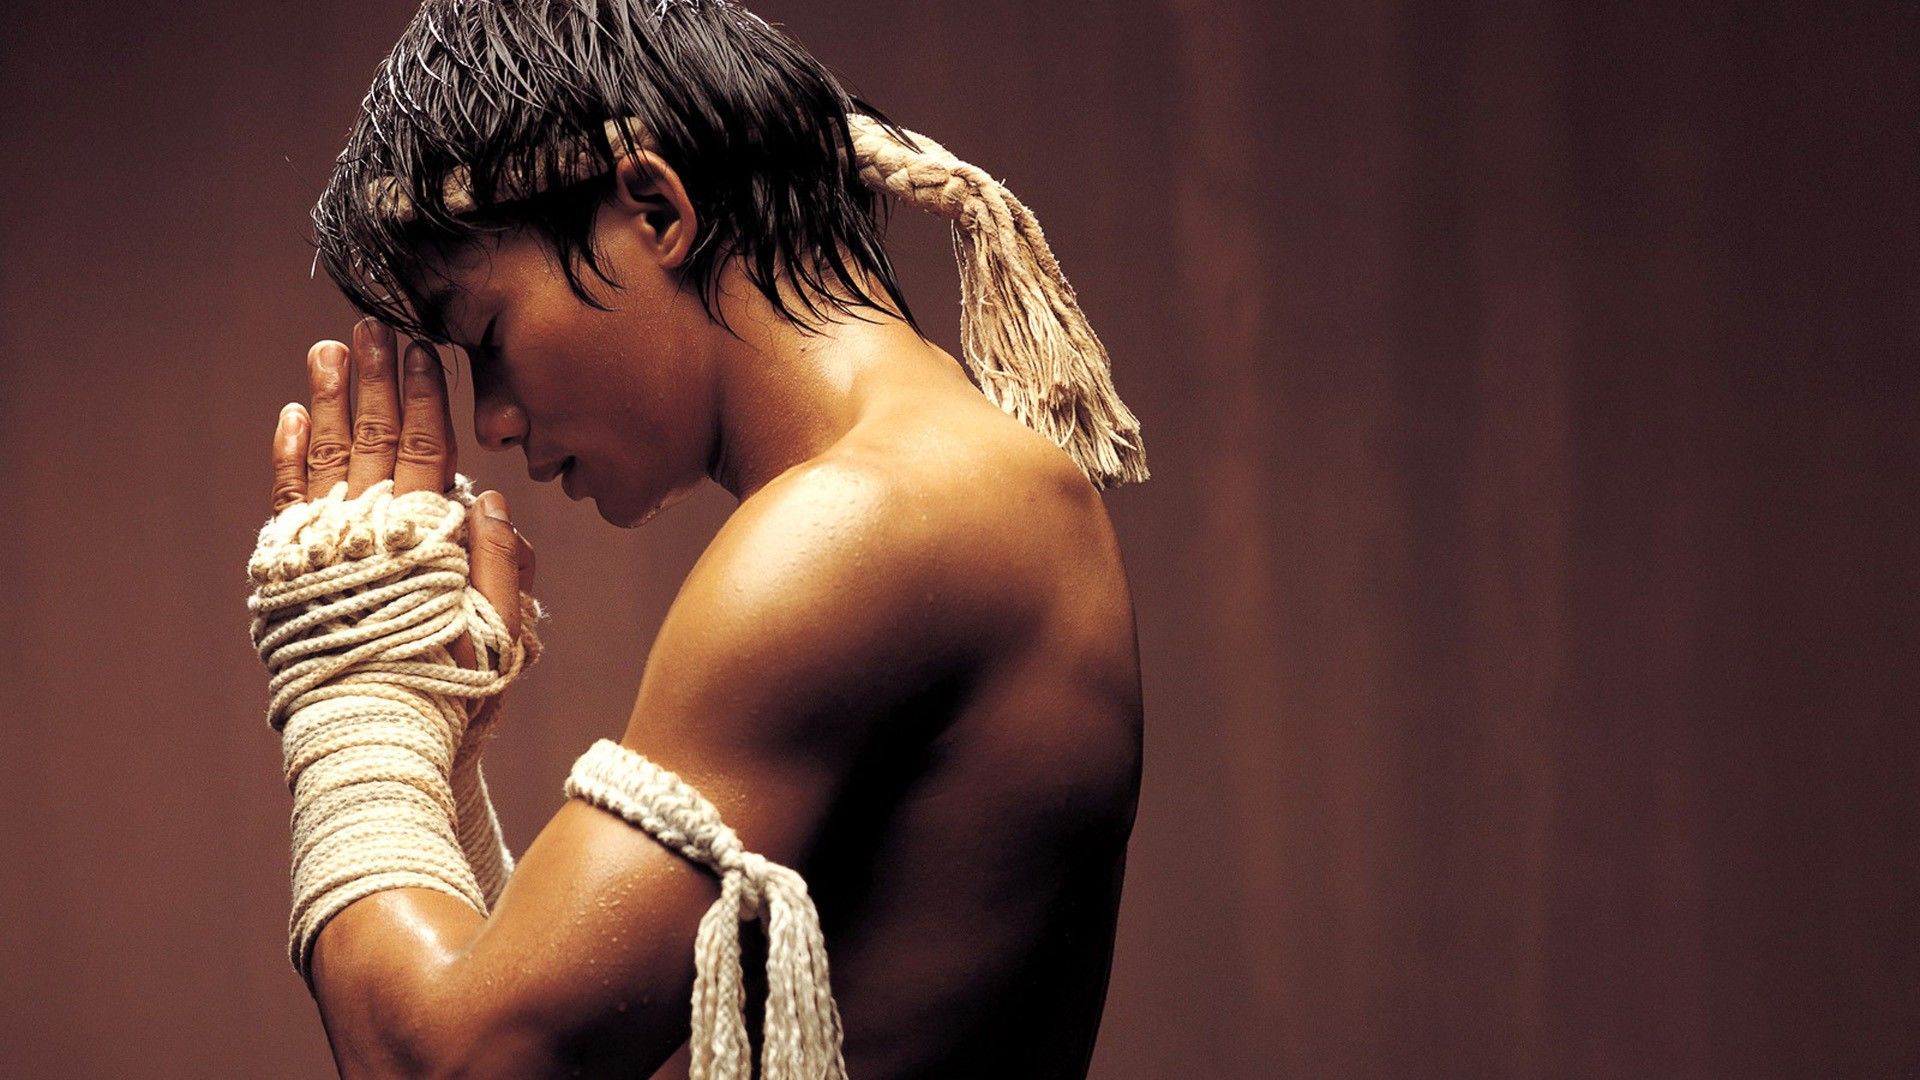 2 Tony Jaa HD Wallpapers | Backgrounds - Wallpaper Abyss